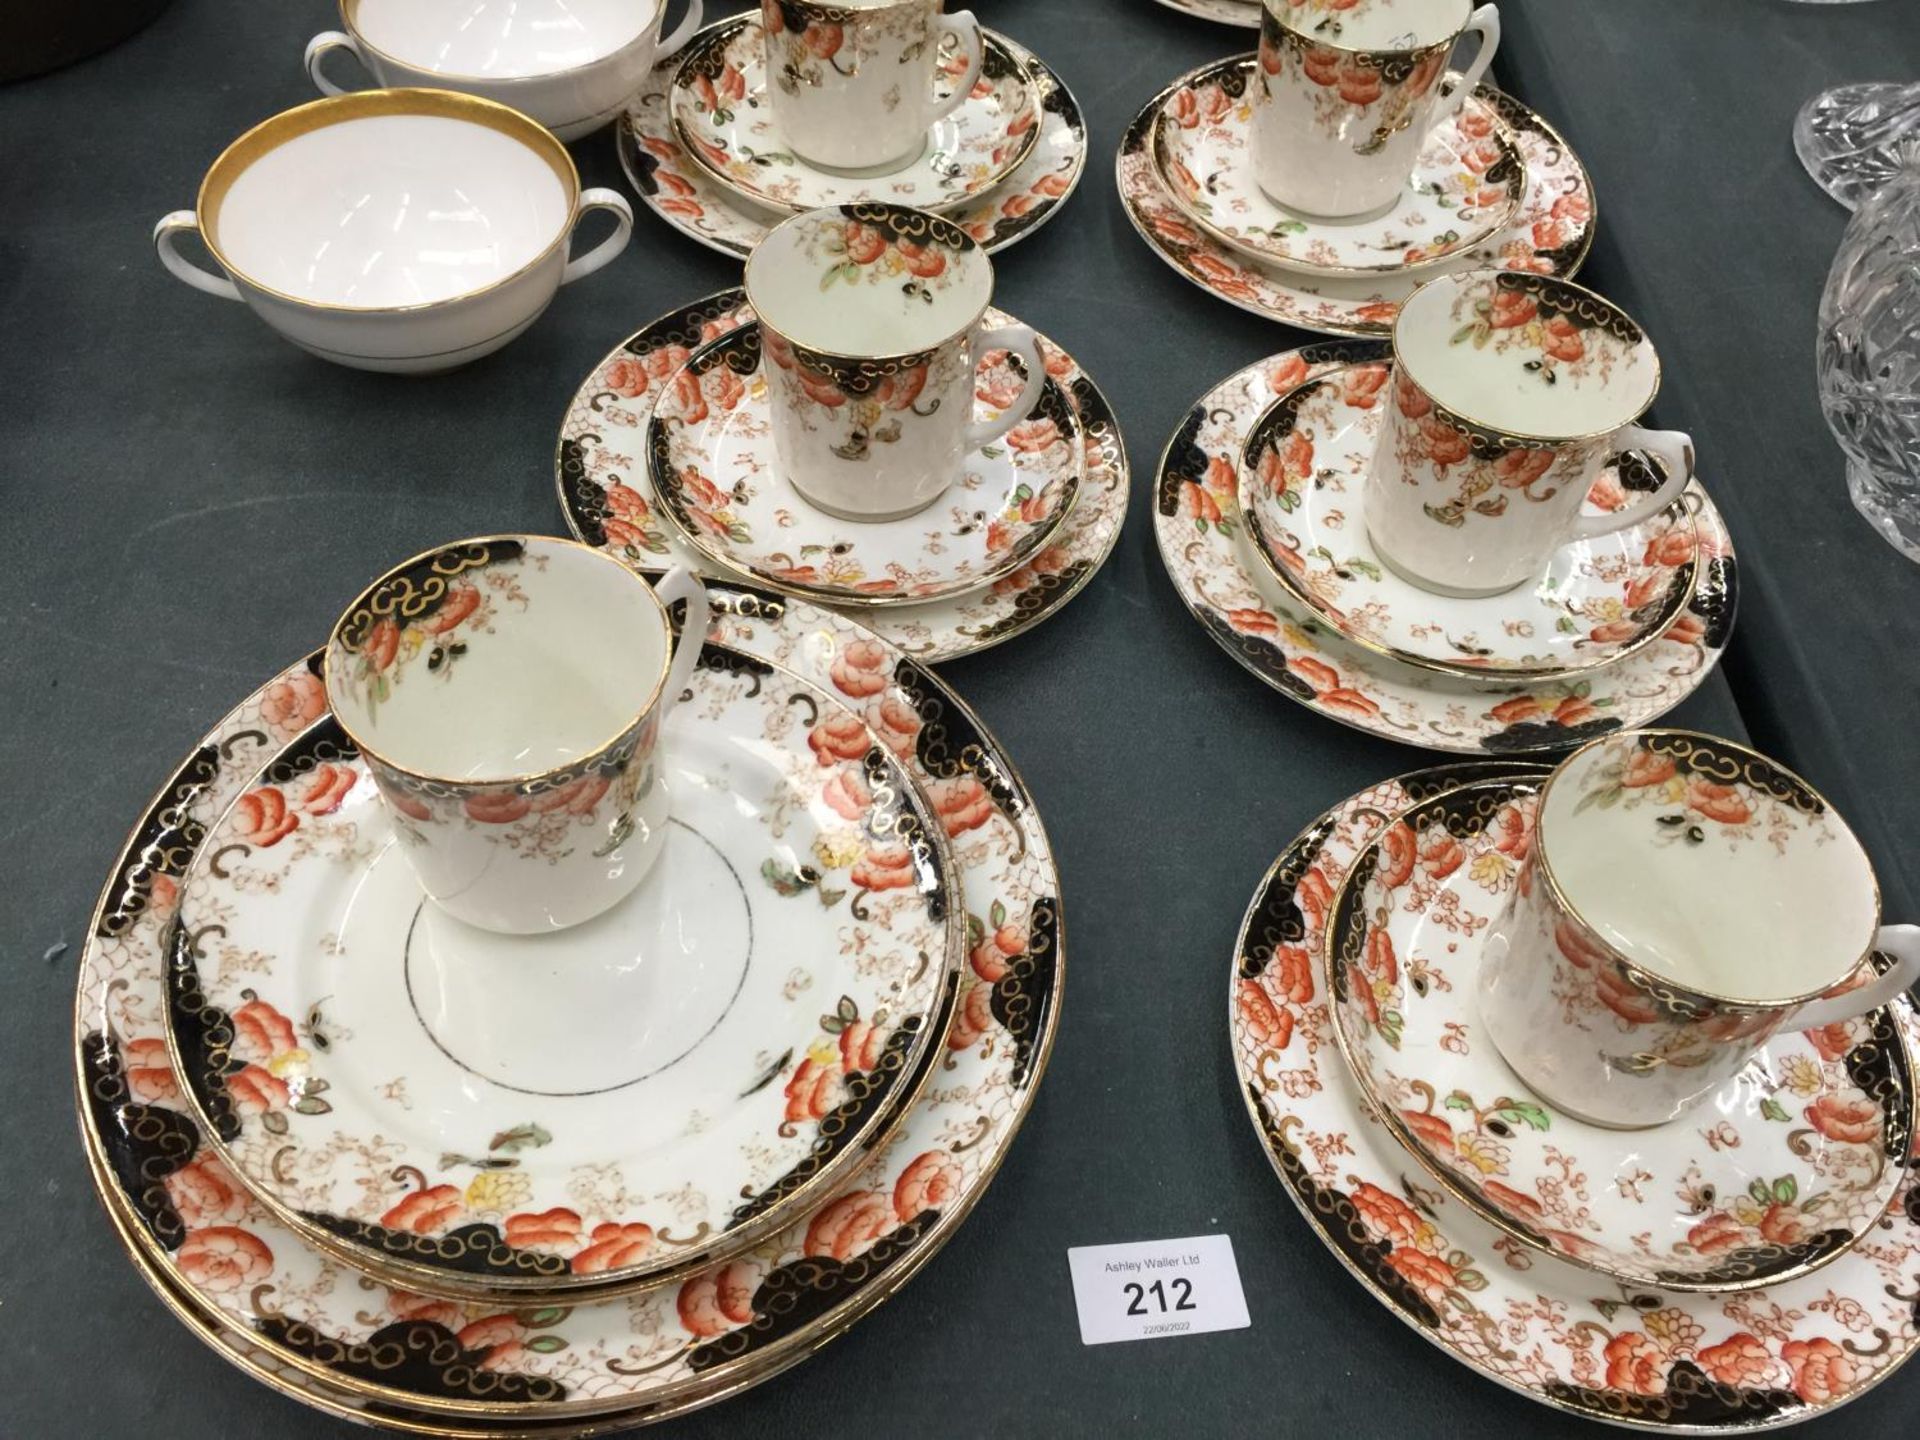 A QUANTITY OF DELPHINE CHINA CUPS, SAUCERS, PLATES, ETC, PLUS FOUR ROYAL DOULTON 'ROYAL GOLD' TWIN - Image 4 of 5